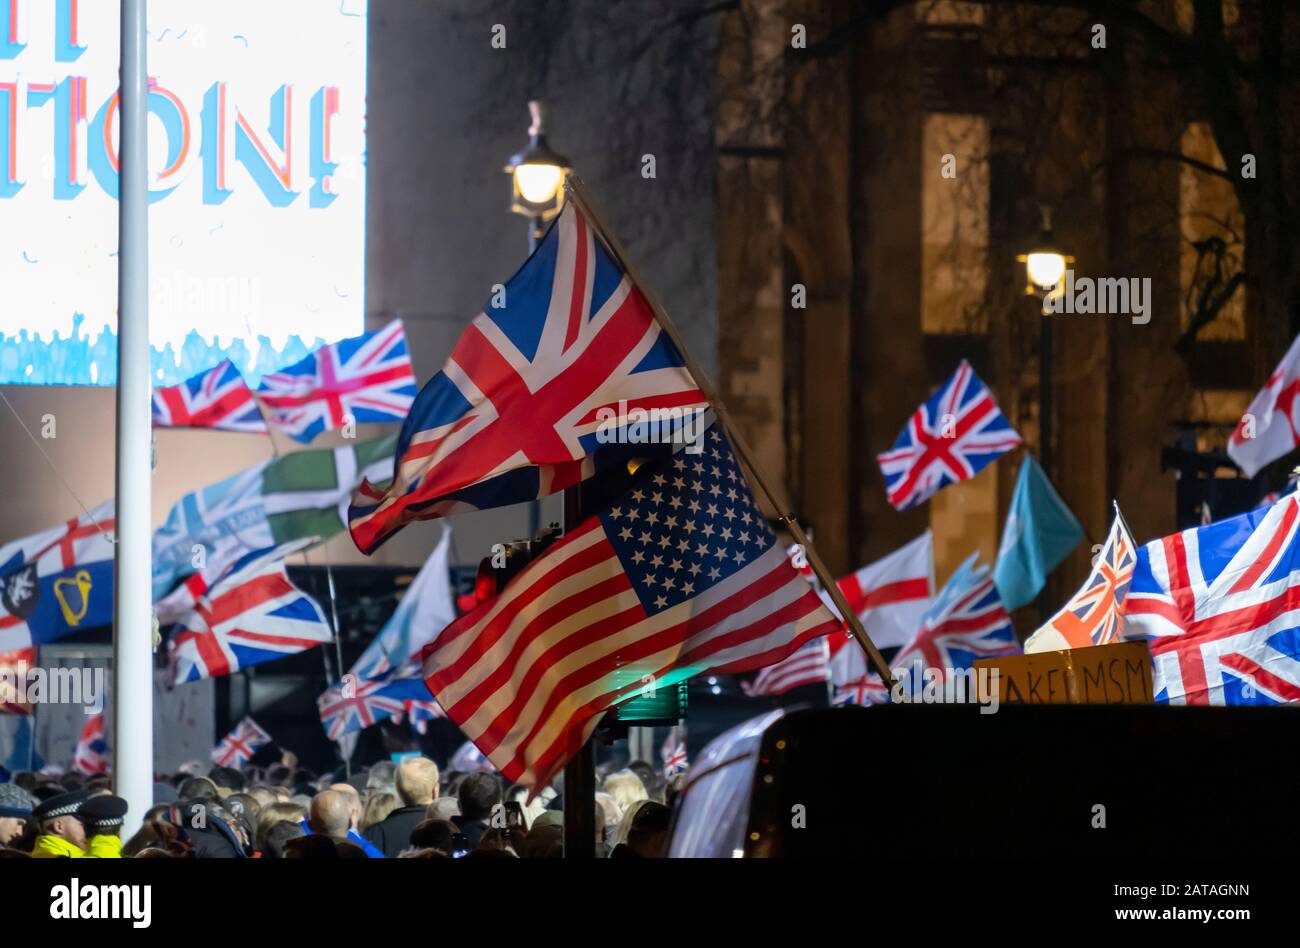 Parliament Square, London, UK. 31st January 2020. Crowds at the Leave Means Leave Brexit Celebration opposite the Houses of Parliament to mark the UK leaving the EU at 11.00pm. Credit: Malcolm Park/Alamy. Stock Photo